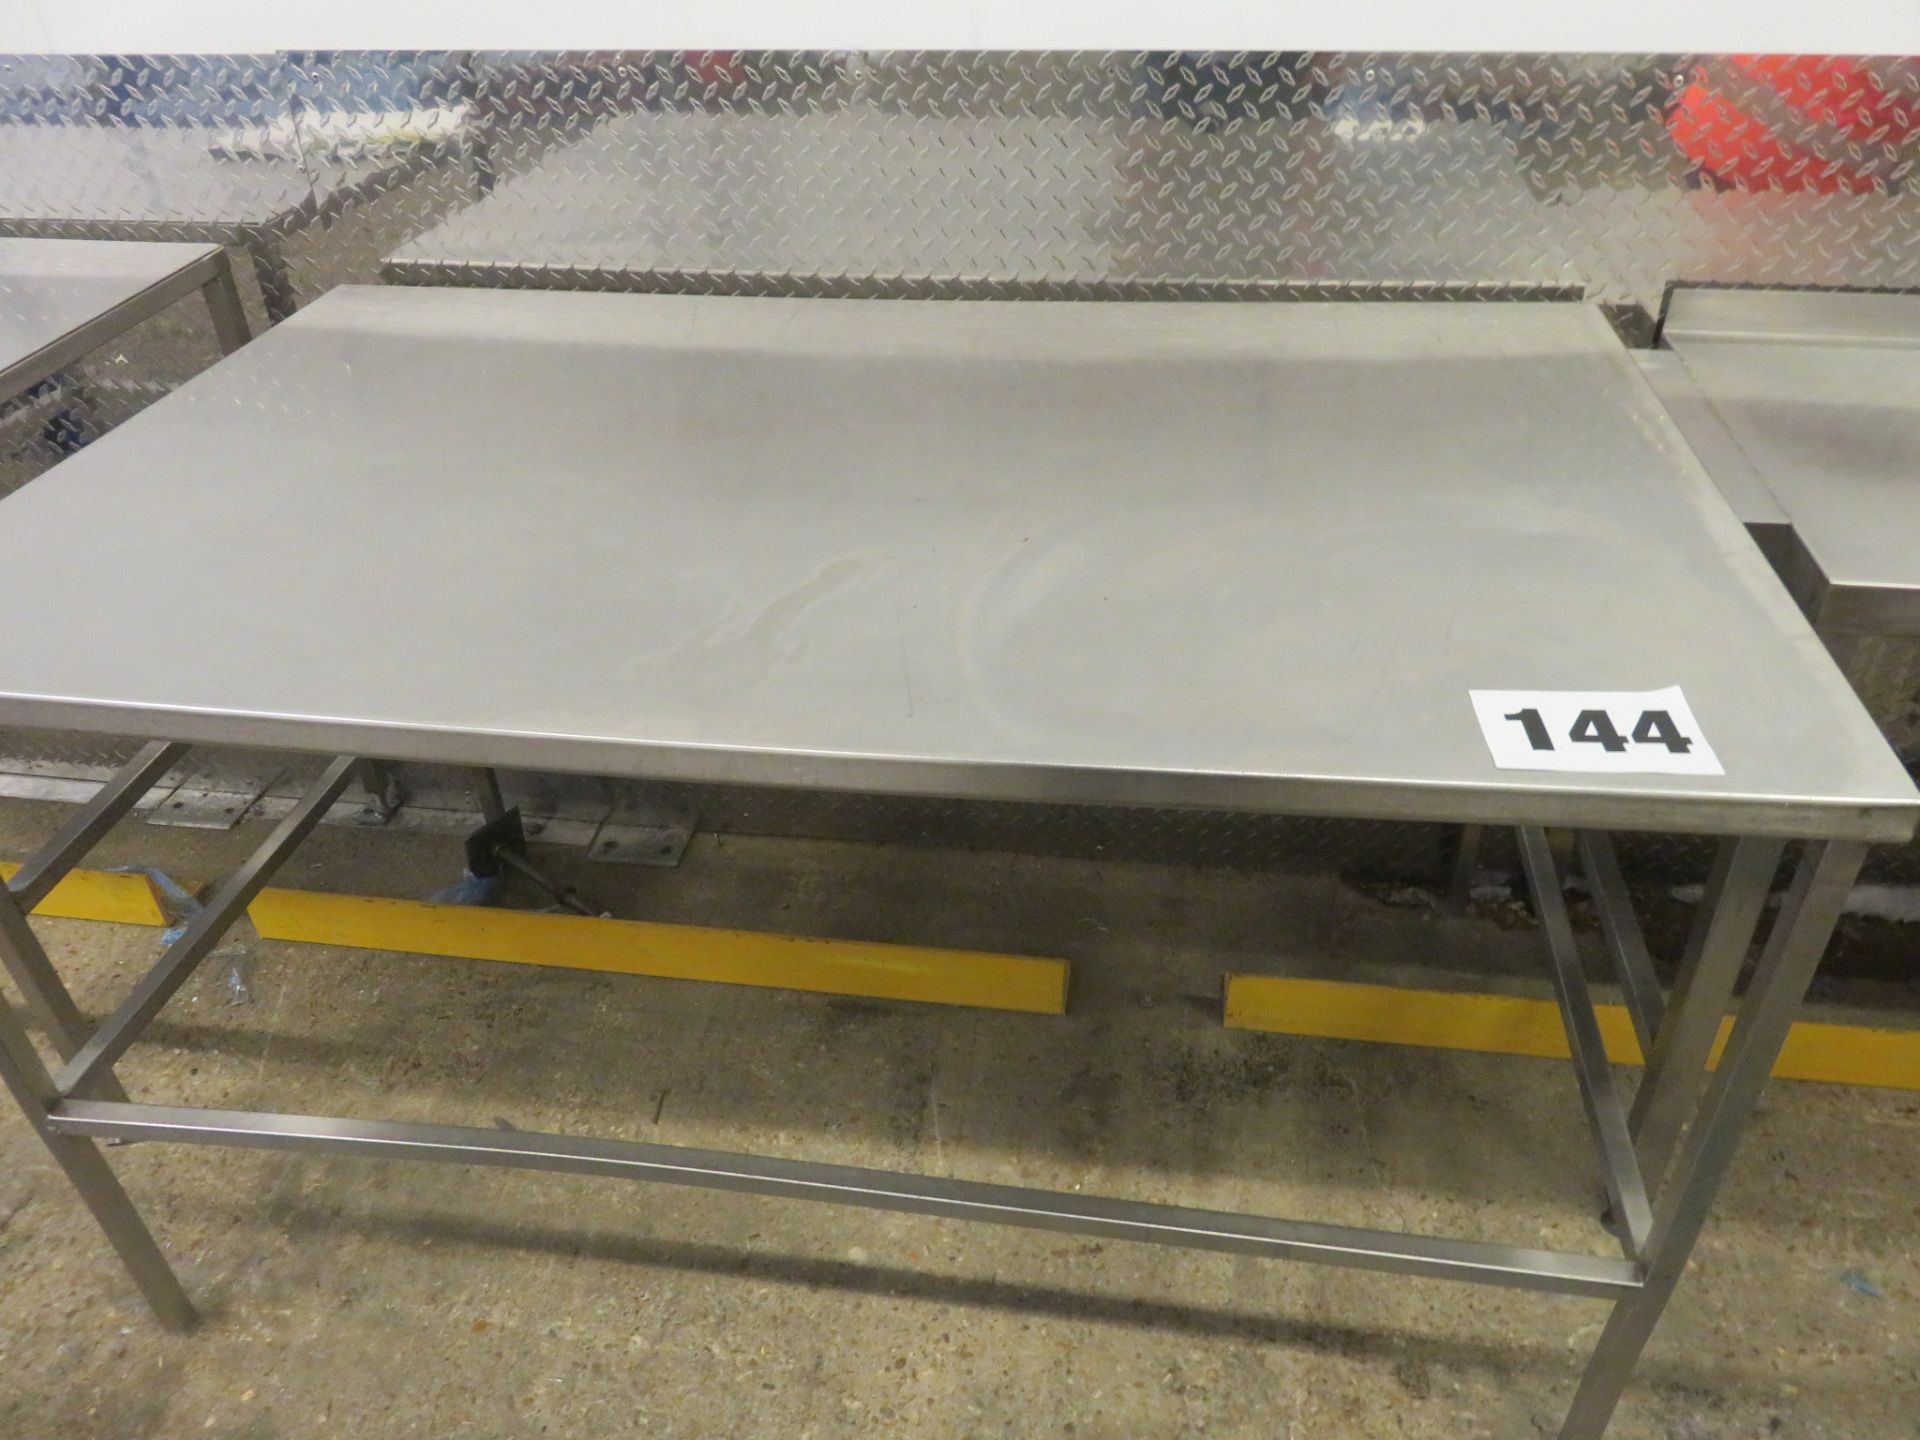 Table S/s 1500 x 920mm. Lift out £10